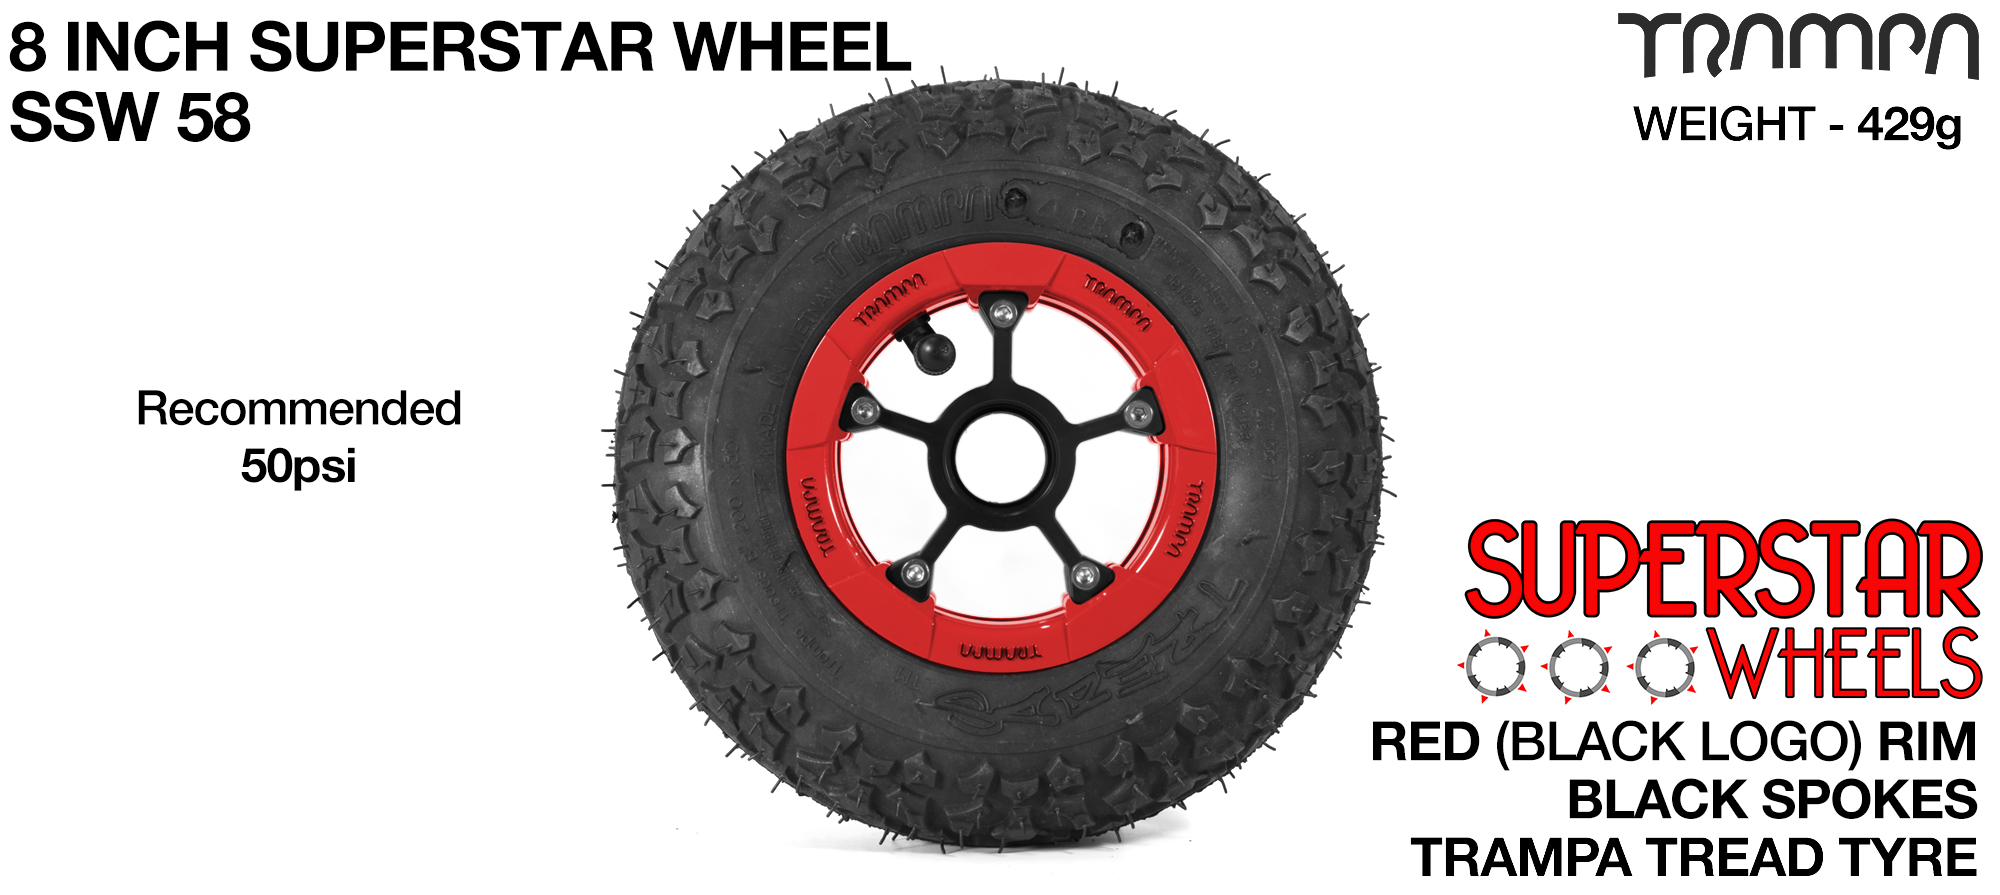 Superstar 8 inch wheel - Red Gloss Rim with Black Anodised spokes & TRAMPA TREAD 8 Inch Tyres